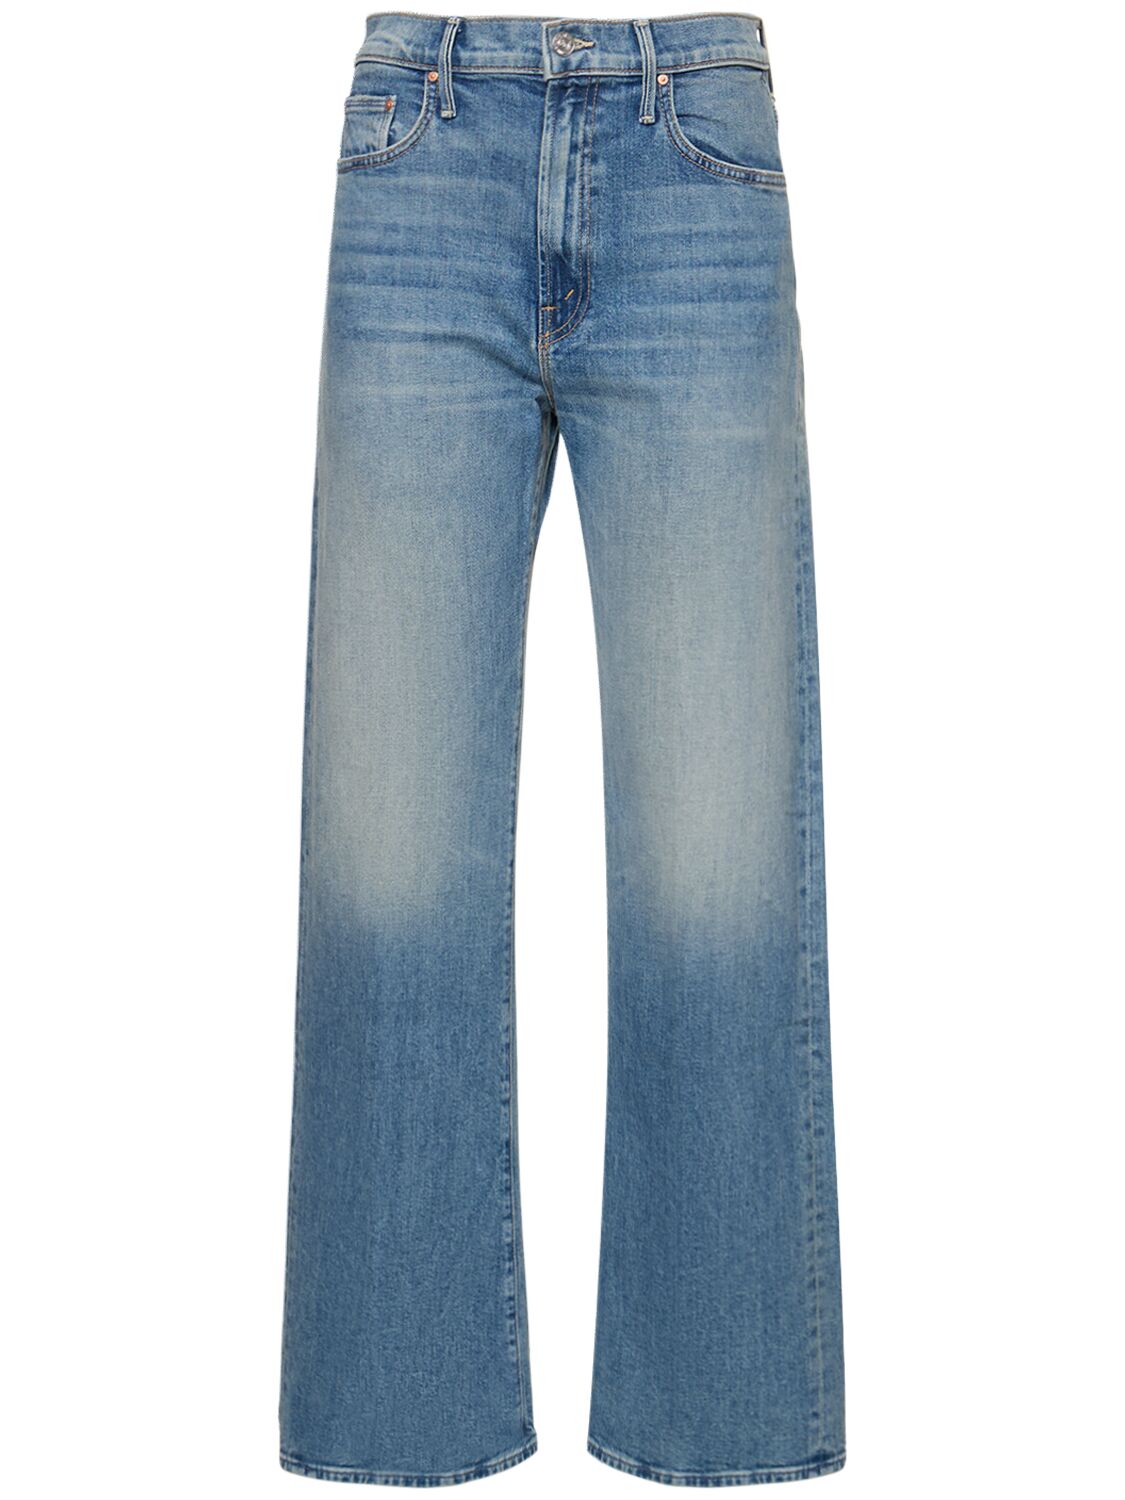 Image of The Lasso Sneak High Rise Jeans